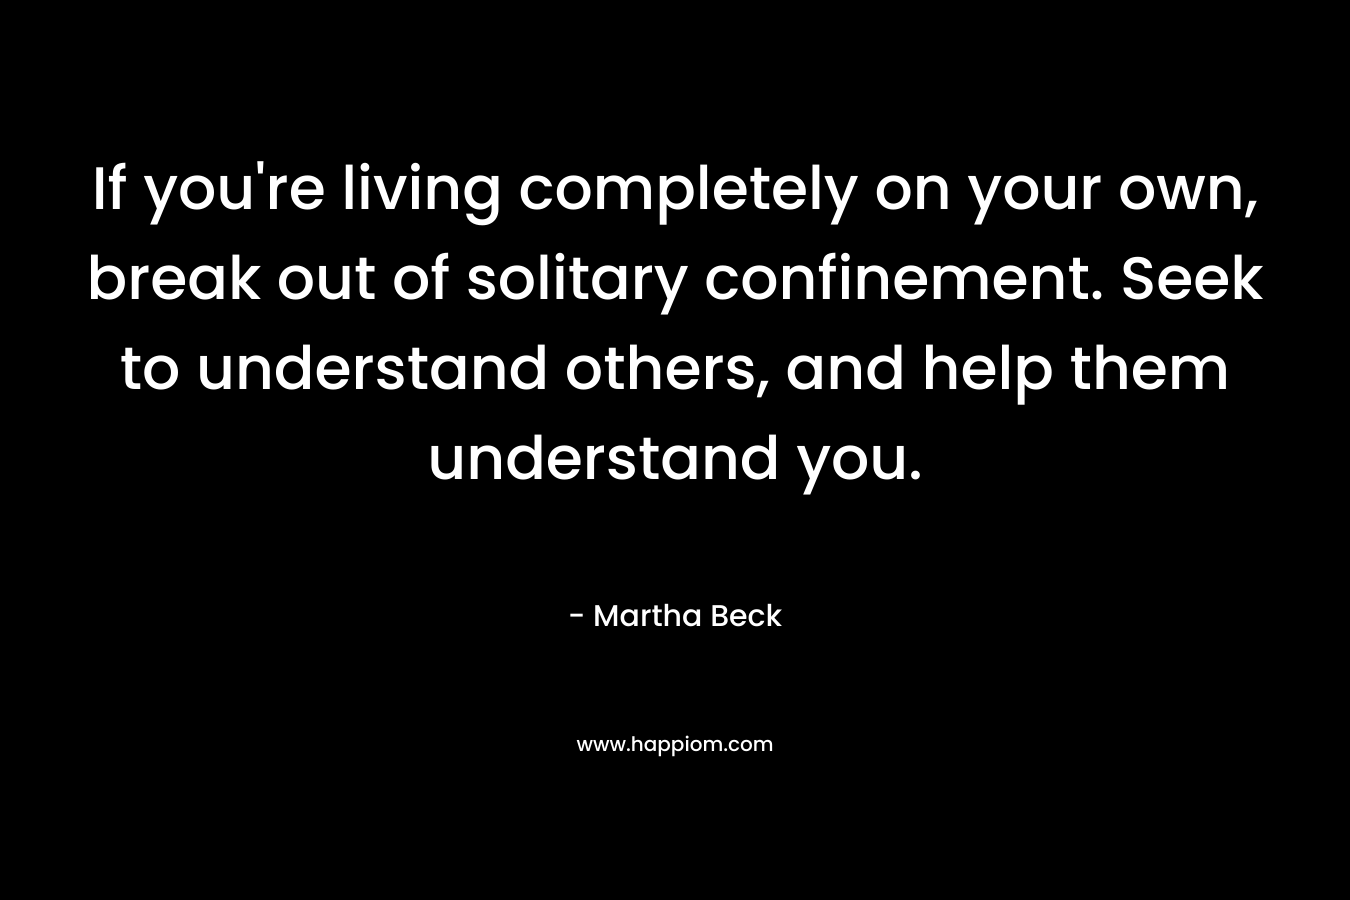 If you're living completely on your own, break out of solitary confinement. Seek to understand others, and help them understand you.